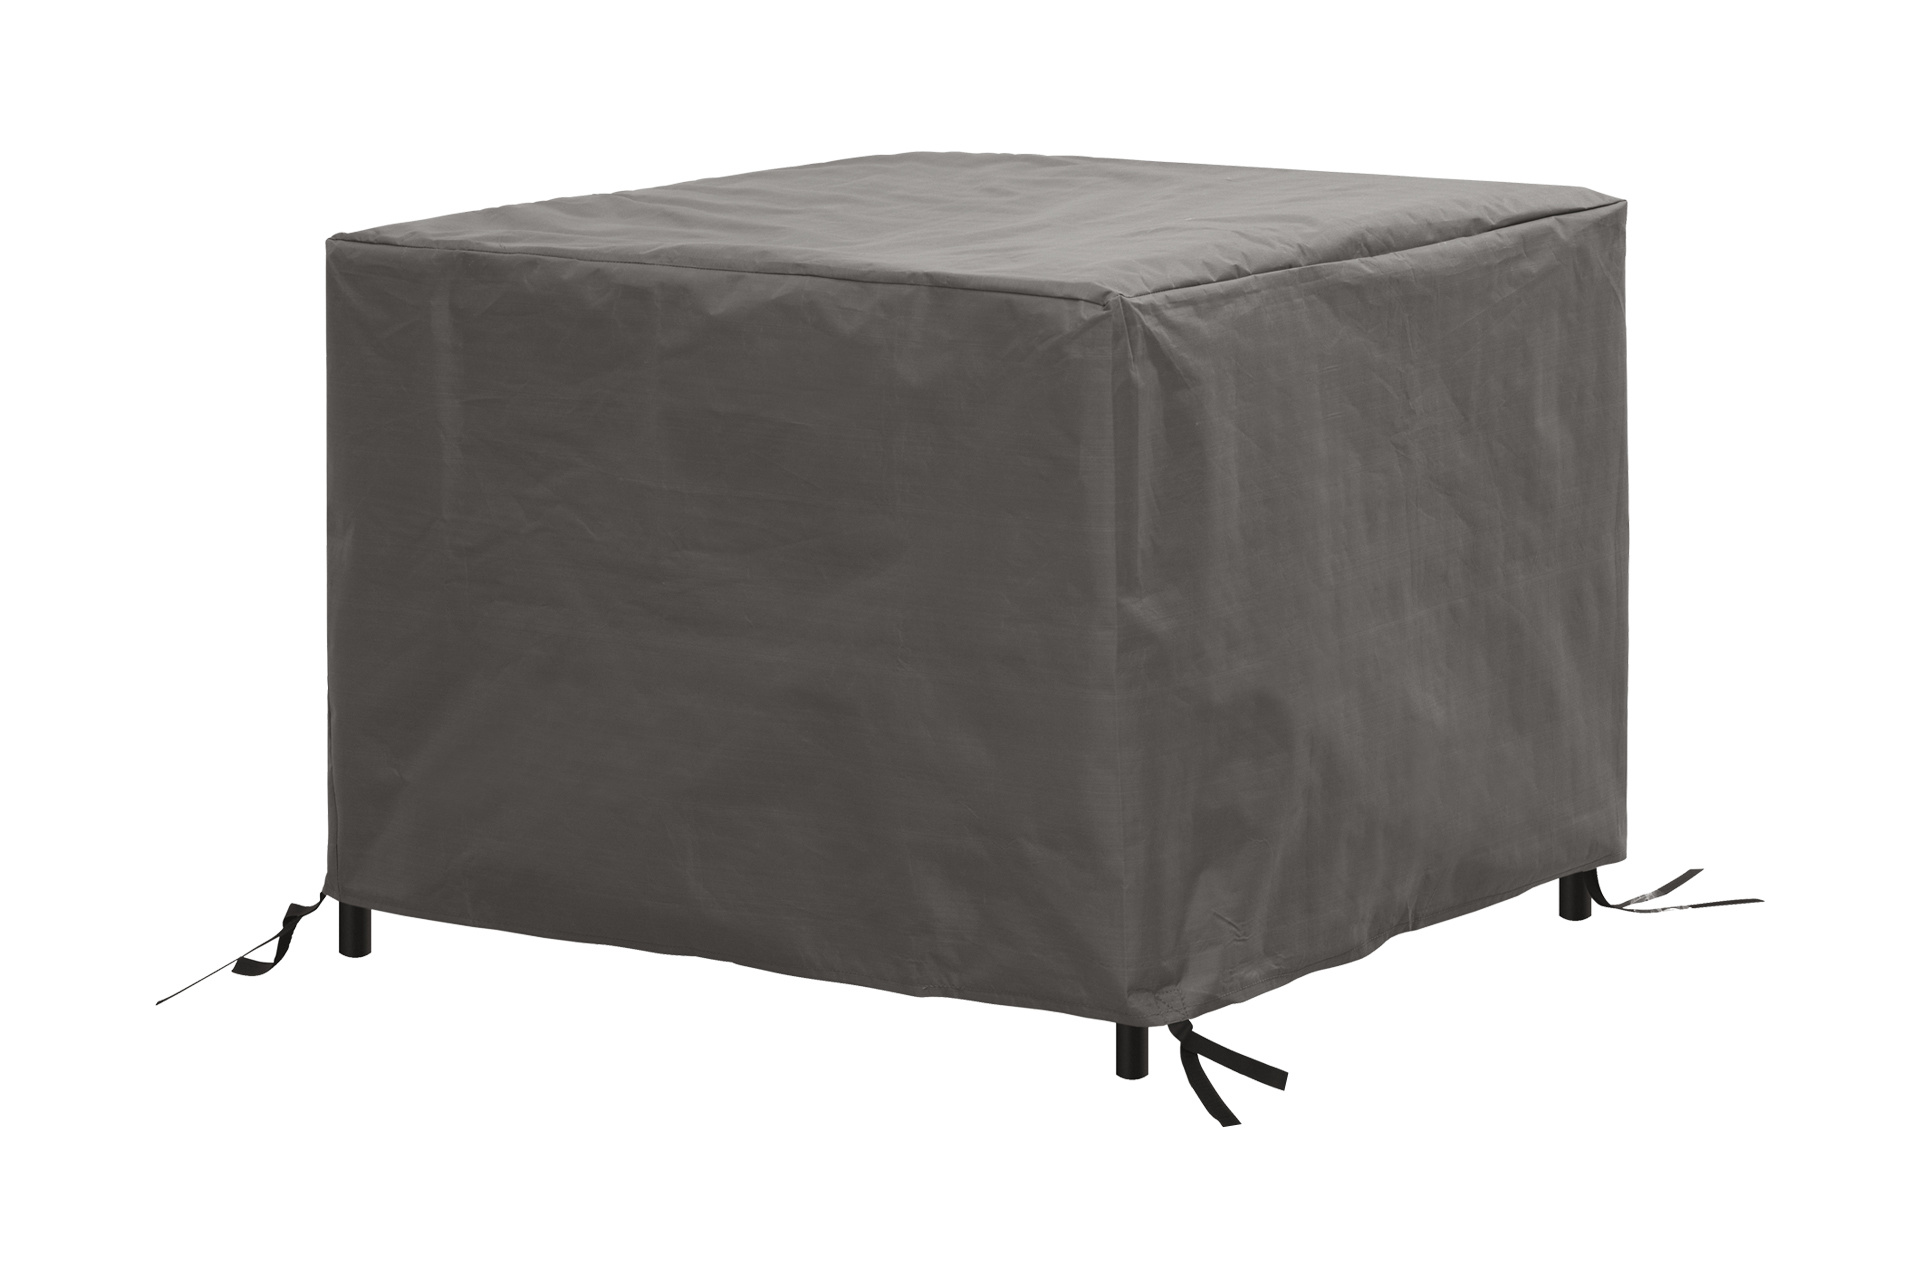 grond schipper Lounge Hoes loungestoel - Outdoor Covers - 95x95x70 cm. - Tuinsethoeskopen.nl